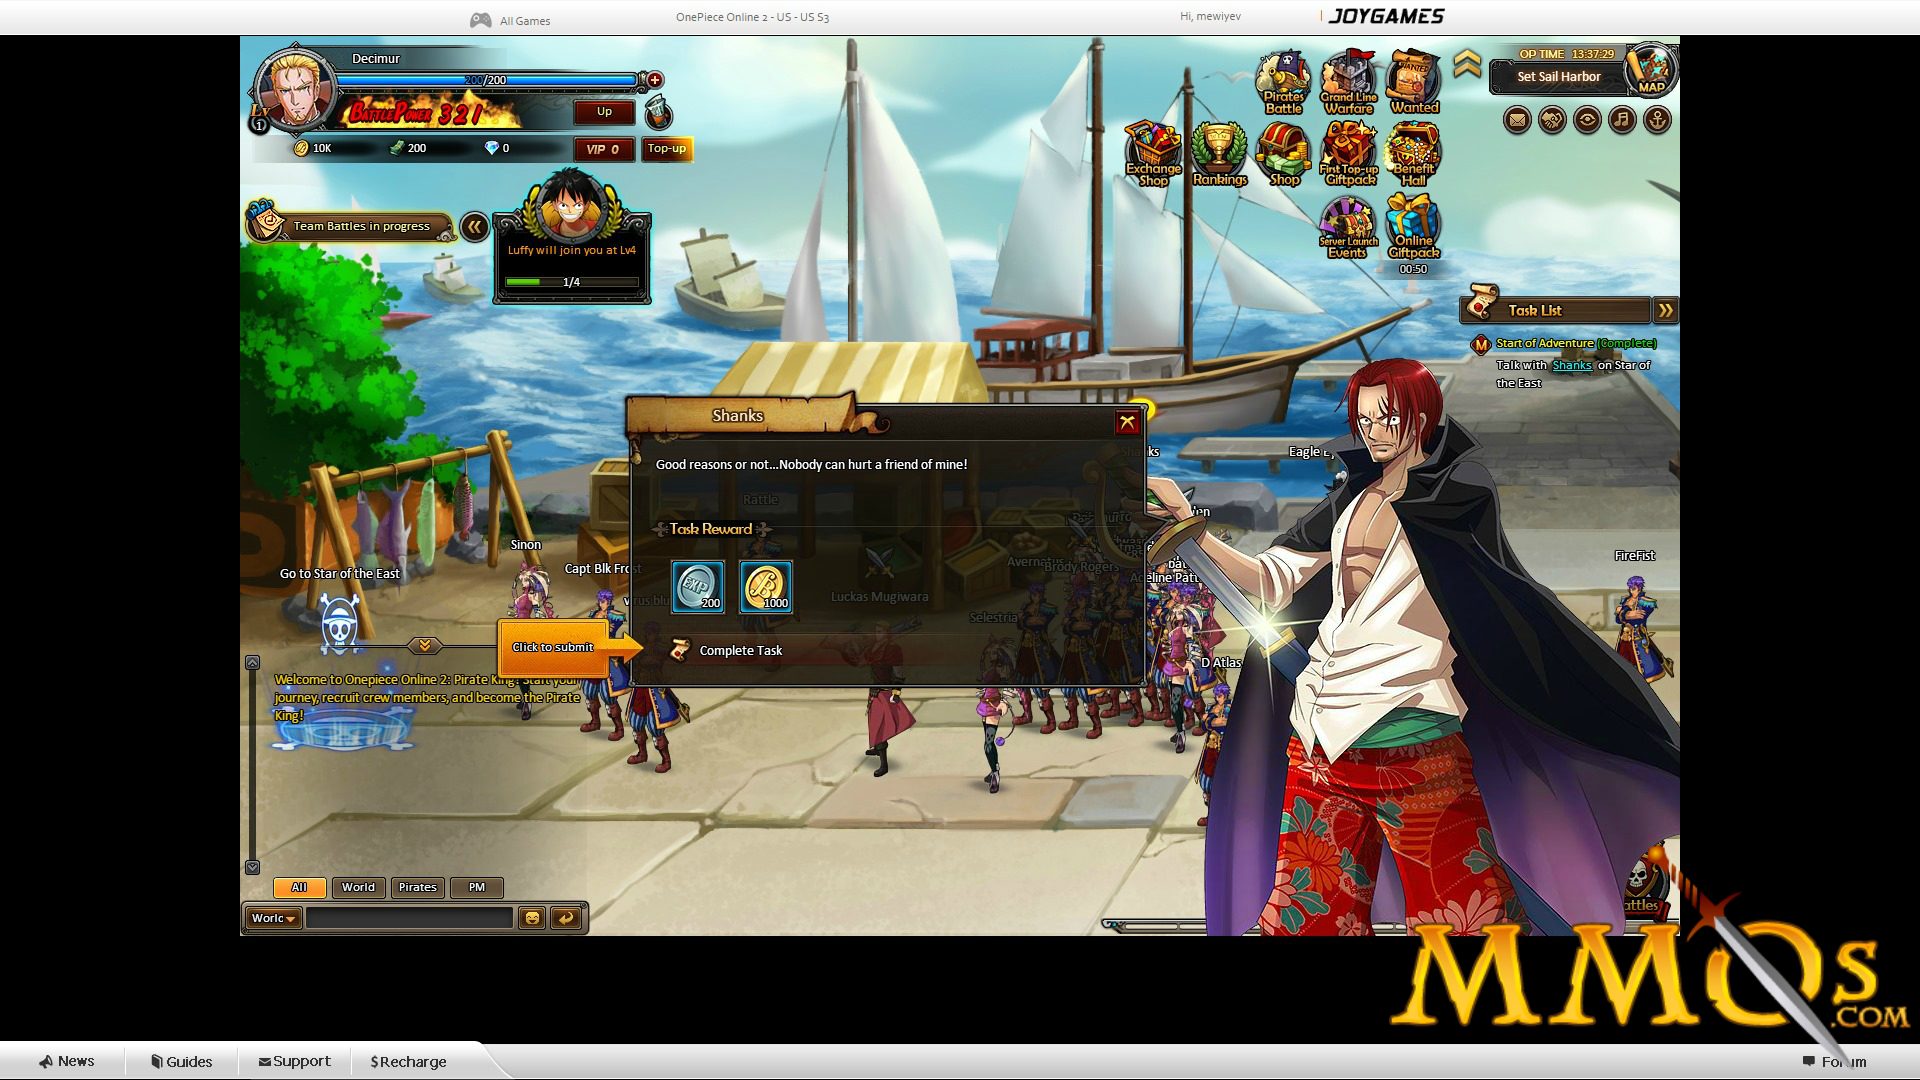 One Piece Online 2: Pirate King Review, Free-to-Play Anime MMO Game